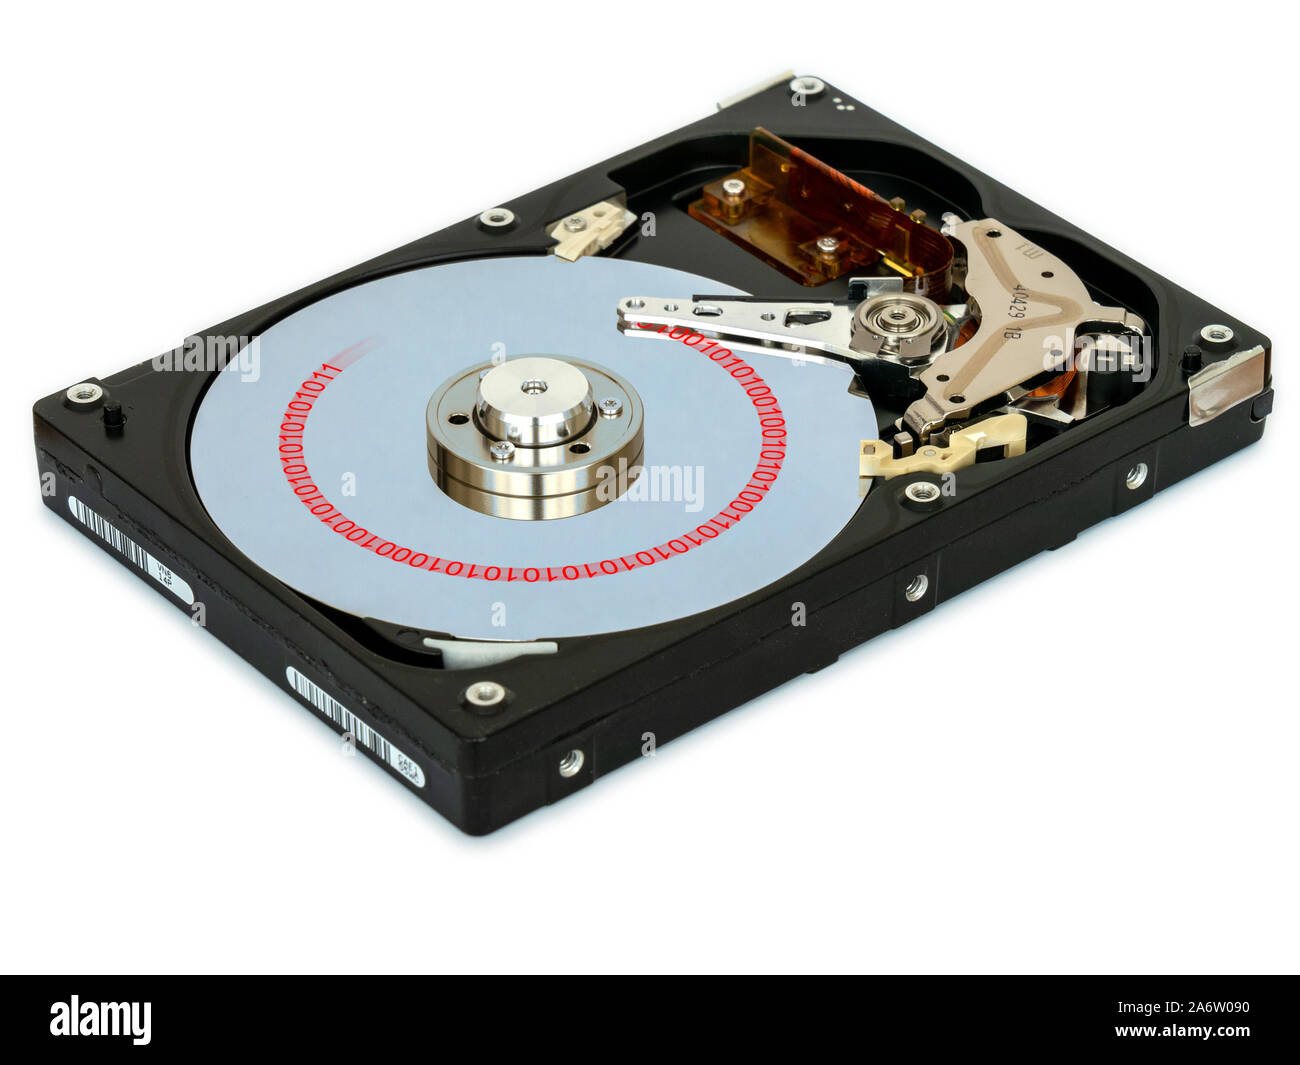 Inside a dismantled 3.5 inch computer hard-disk data storage drive showing platter and read write head. Stock Photo